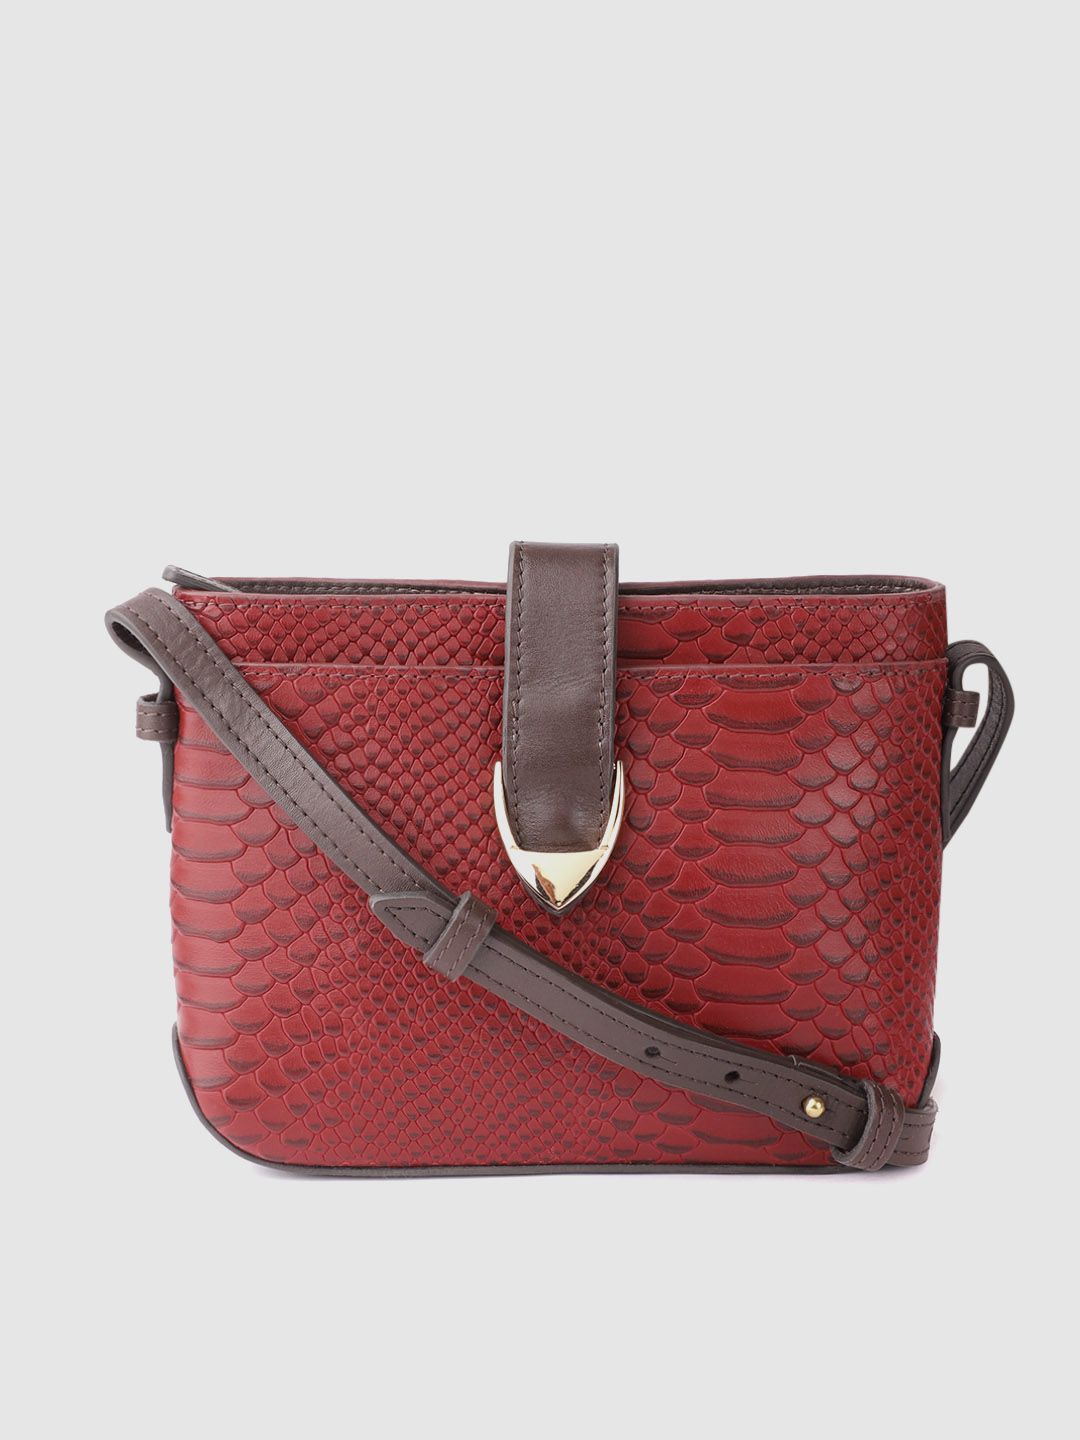 Hidesign Red & Coffee Brown Croc-Textured Leather Sling Bag Price in India